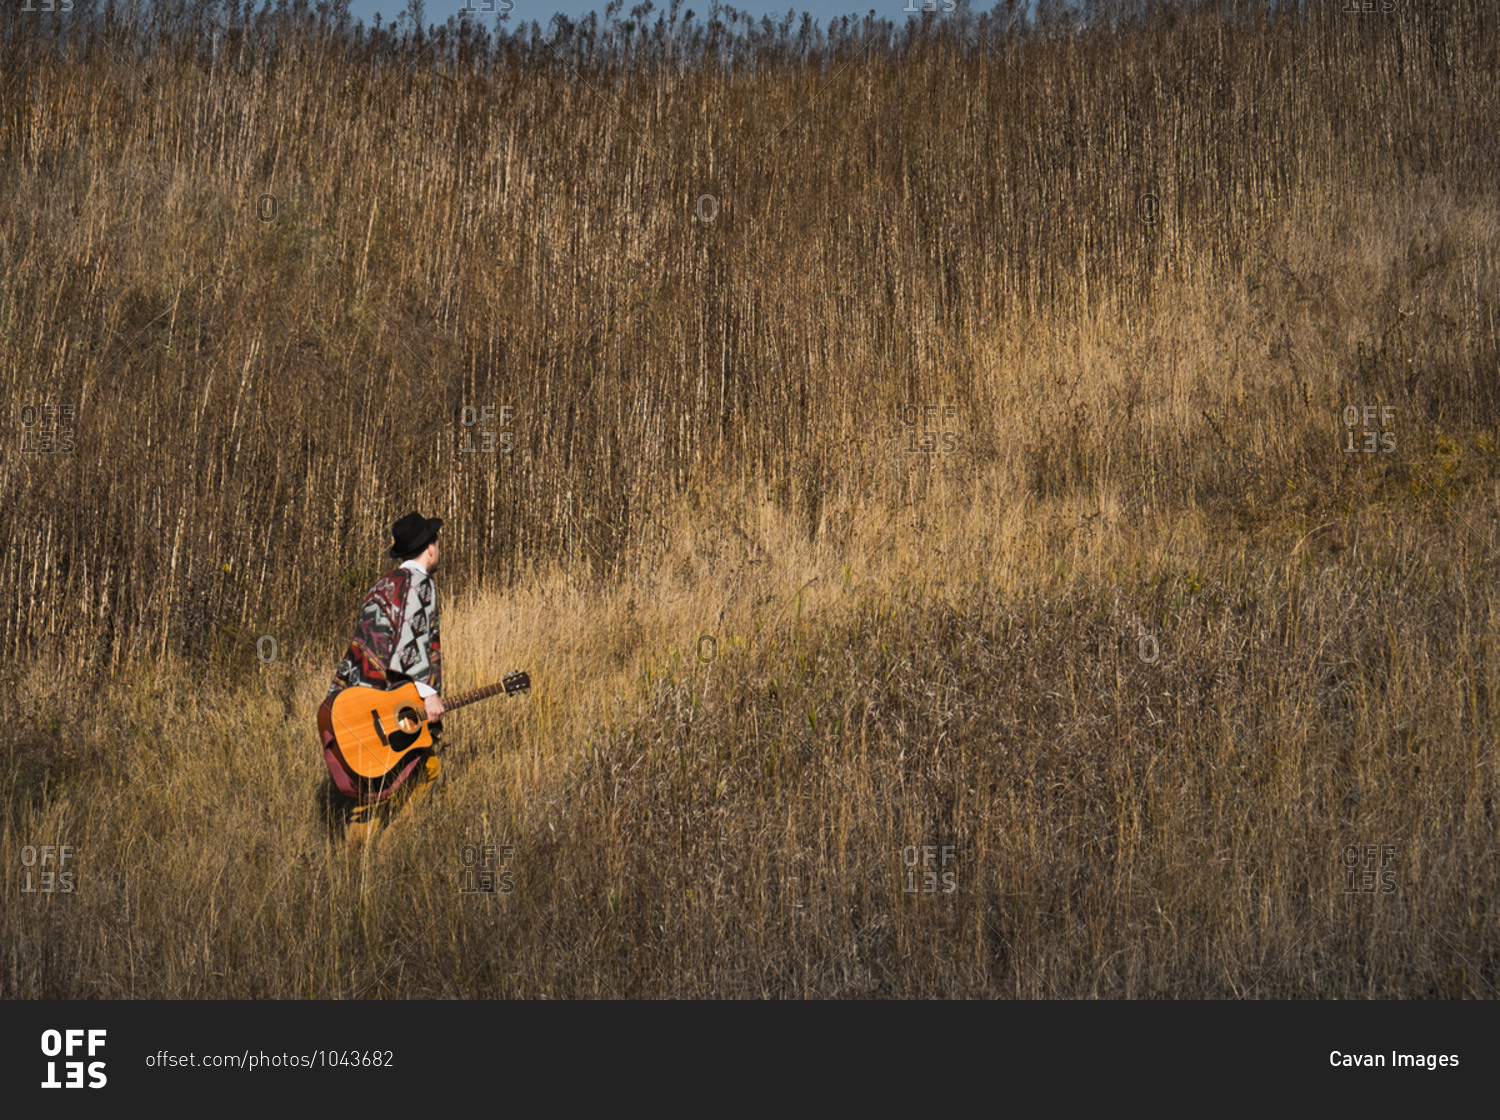 Country musician with acoustic guitar walks in grasses at a field